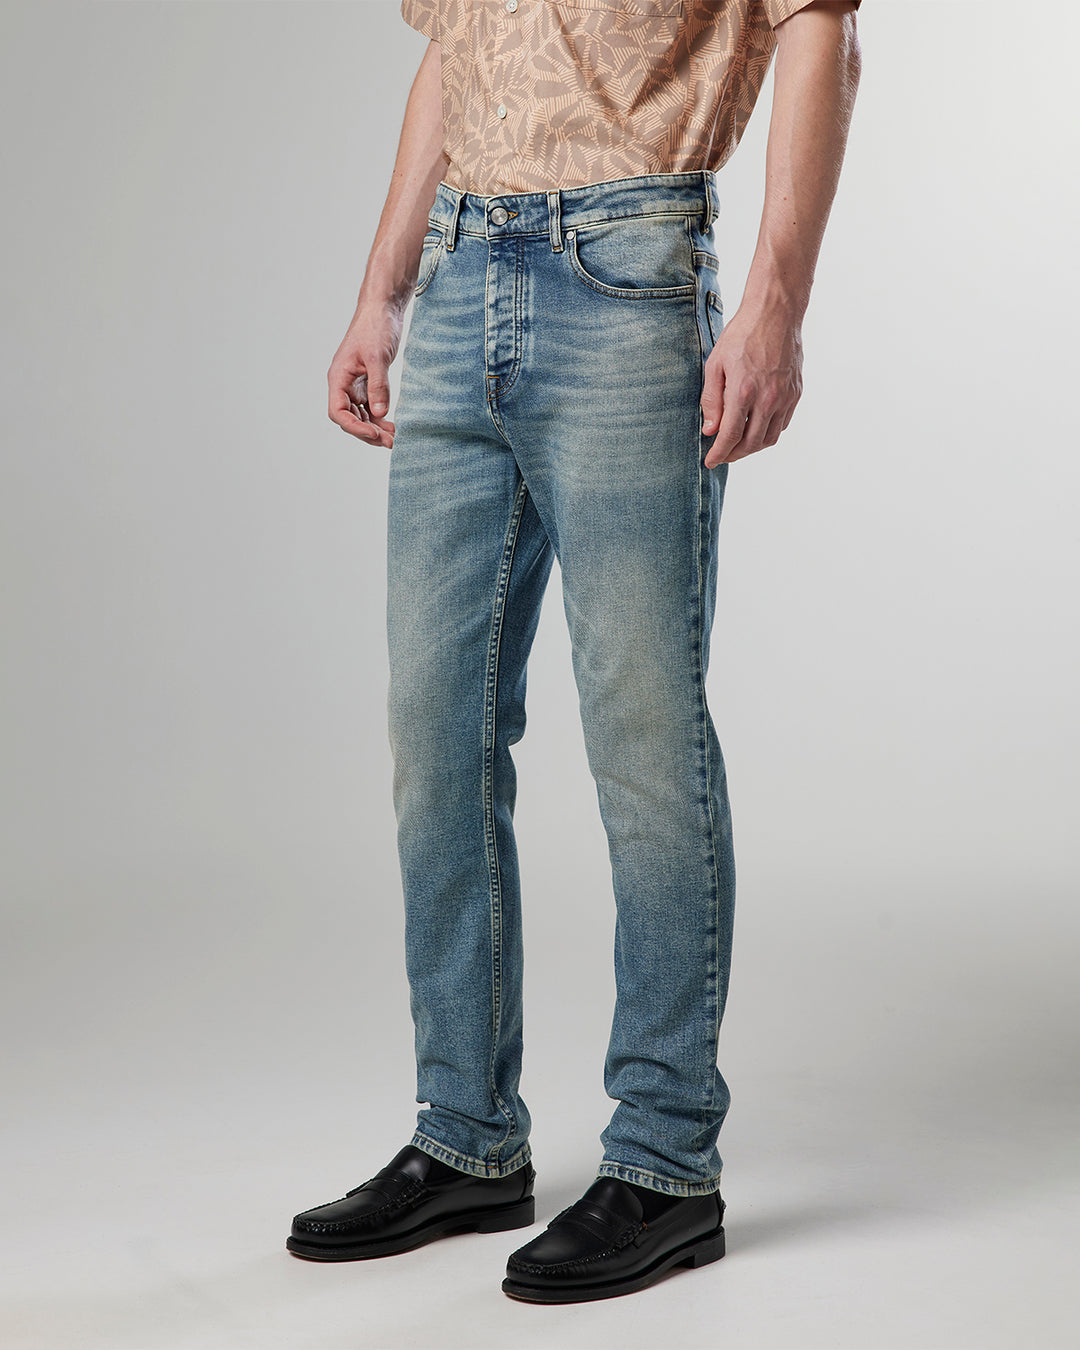 NN07 - Johnny 1839 Jeans in Light Indigo | Buster McGee